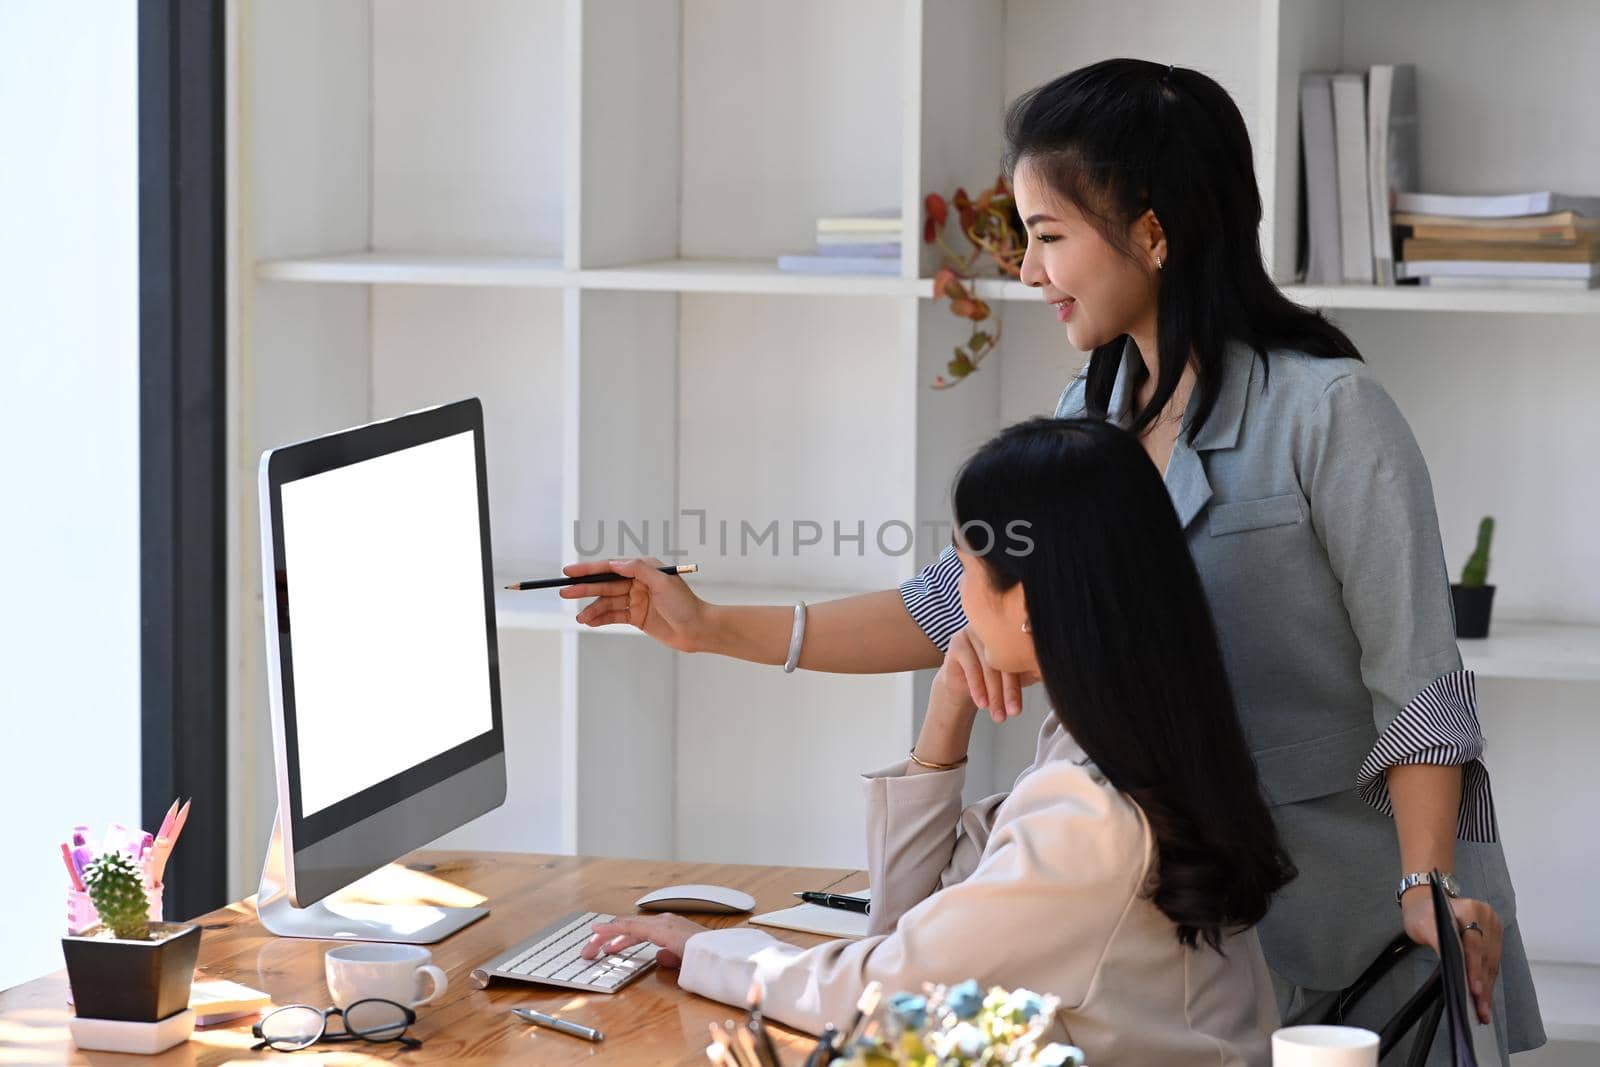 Two businesswomen brainstorming and analyzing financial data on computer.